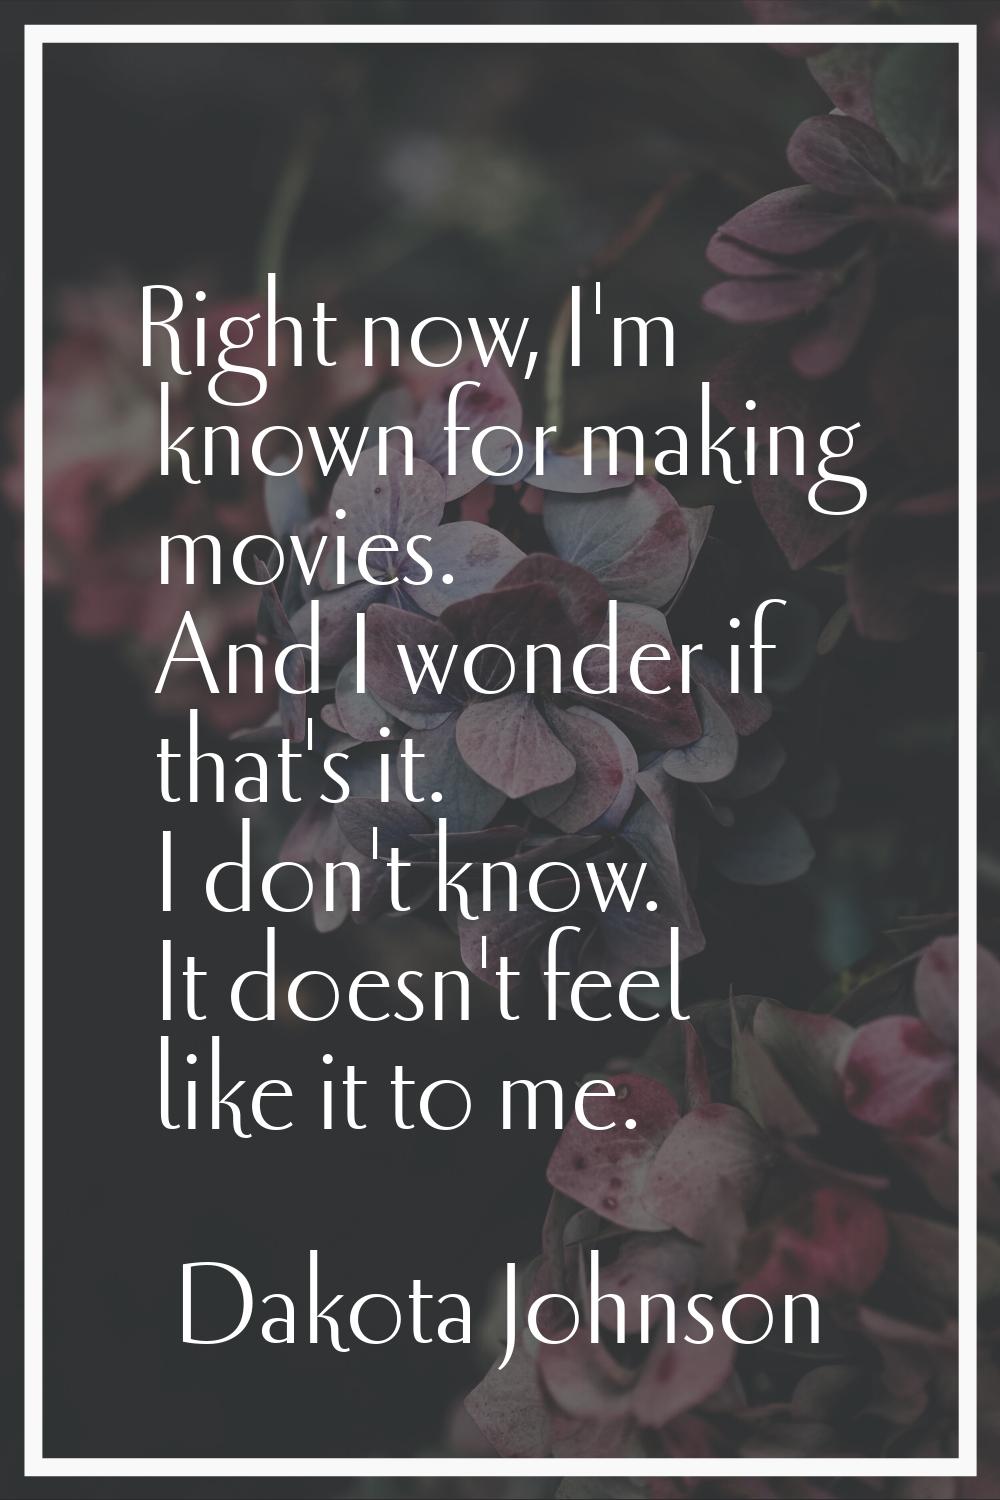 Right now, I'm known for making movies. And I wonder if that's it. I don't know. It doesn't feel li